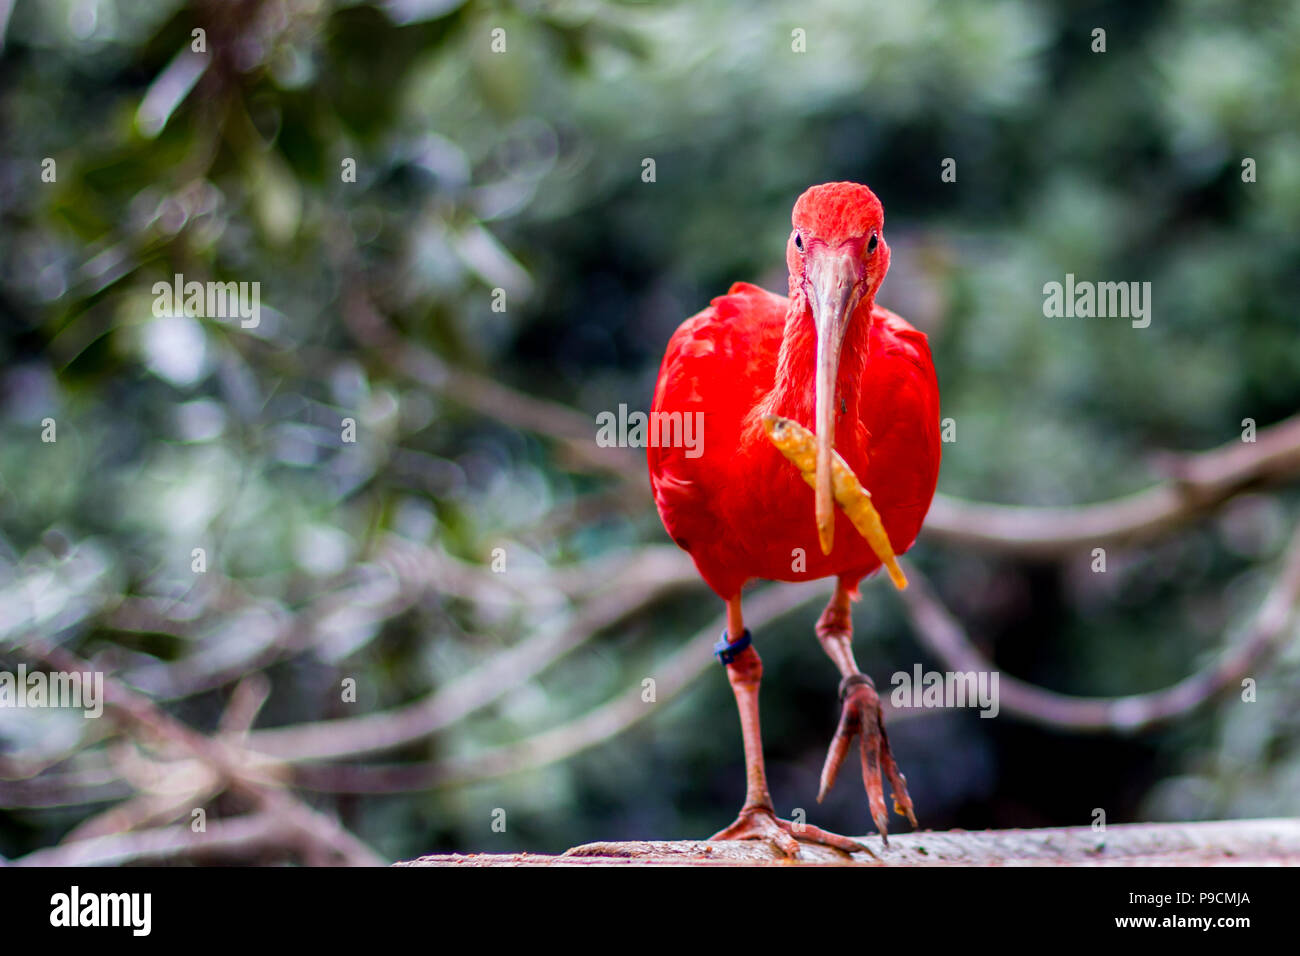 Beautiful red bird called Scarlet Ibis holds its food, a small yellow fish in its beak, looking at the camera, selective focus on eyes Stock Photo